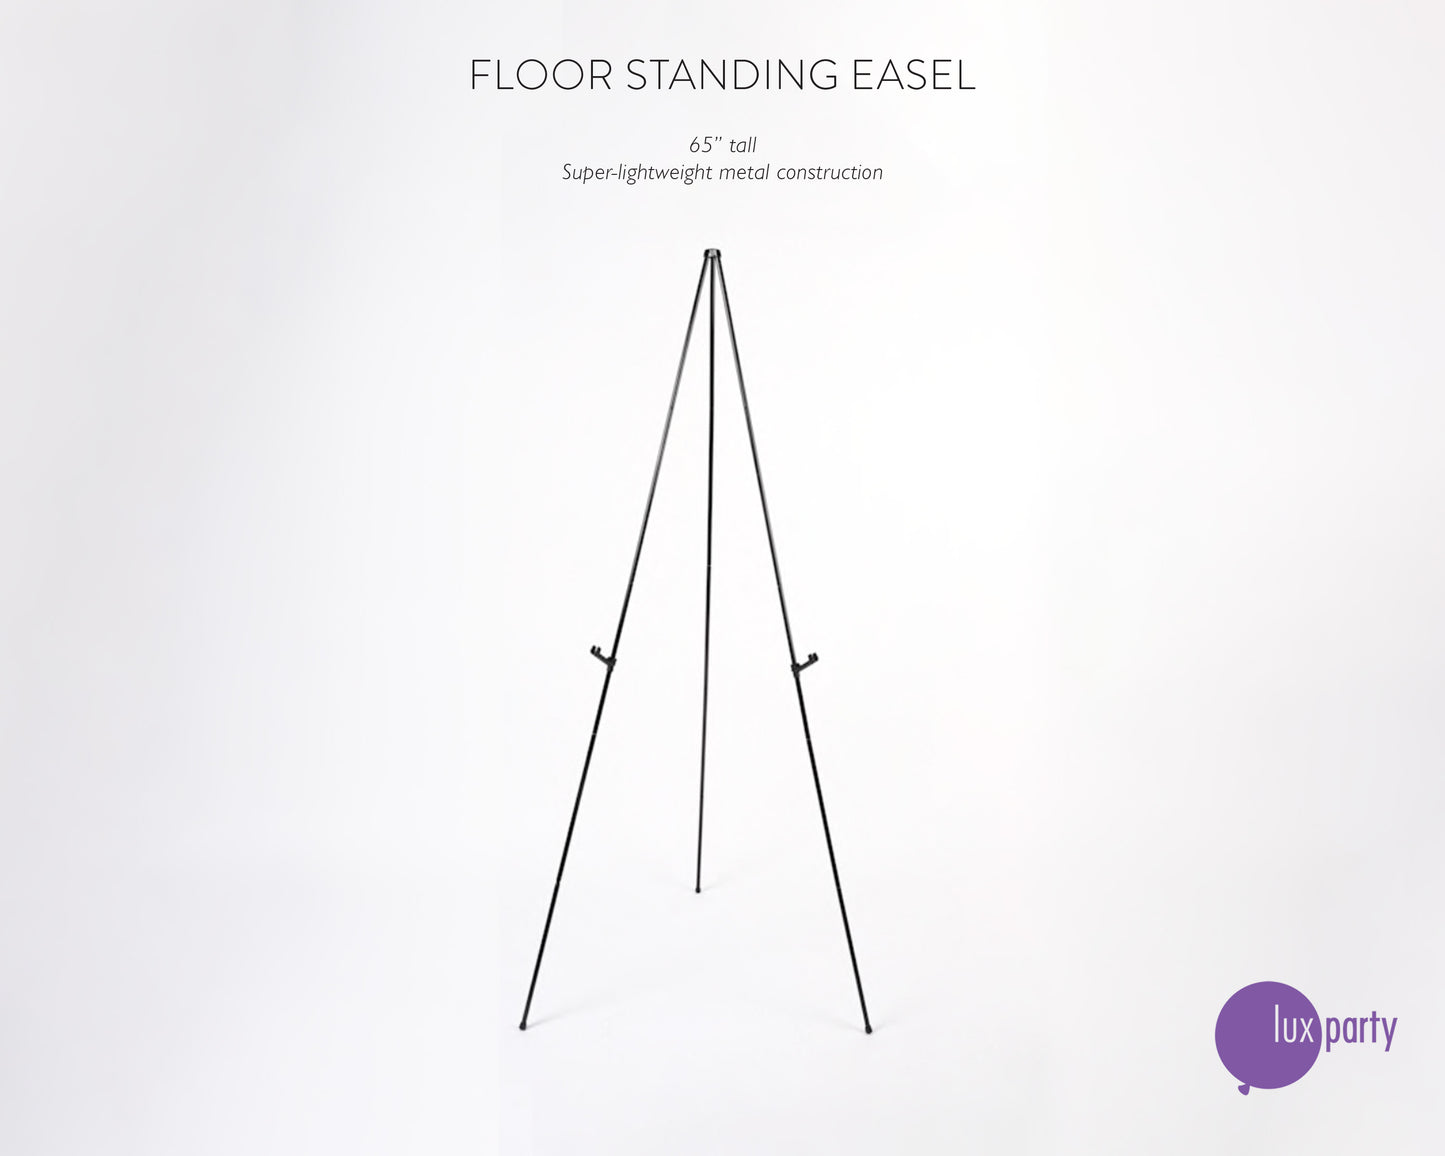 Black lightweight metal floor standing easel against a white background. Lux Party logo.